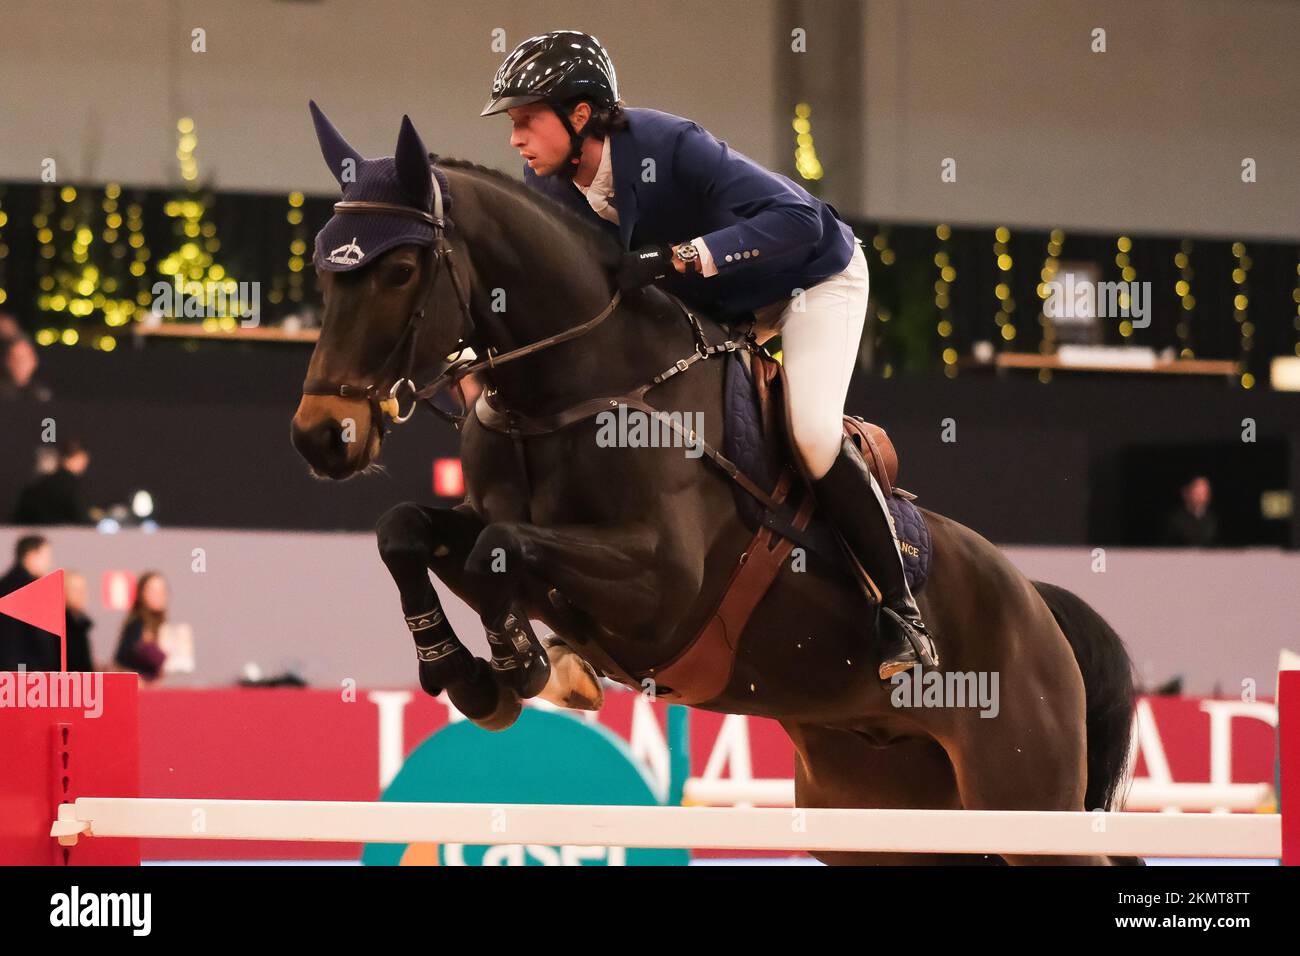 Madrid, Spain. 26th Nov, 2022. Horse rider Martin Fuchs competes during the 'CSI5 Trofeo Estrella Damm' event during the IFEMA Madrid Horse week 2022 at the Main Arena in Ifema, Madrid. IFEMA Madrid Horse week is a multidisciplinary equestrian event which involves competitions and show programs. This holiday of horses and riders is held annually from November 25th to 27th and this year they celebrate their 10th anniversary. IFEMA is short for Institución Ferial de Madrid or 'Fair Institution of Madrid' (Photo by Atilano Garcia/SOPA Images/Sipa USA) Credit: Sipa USA/Alamy Live News Stock Photo